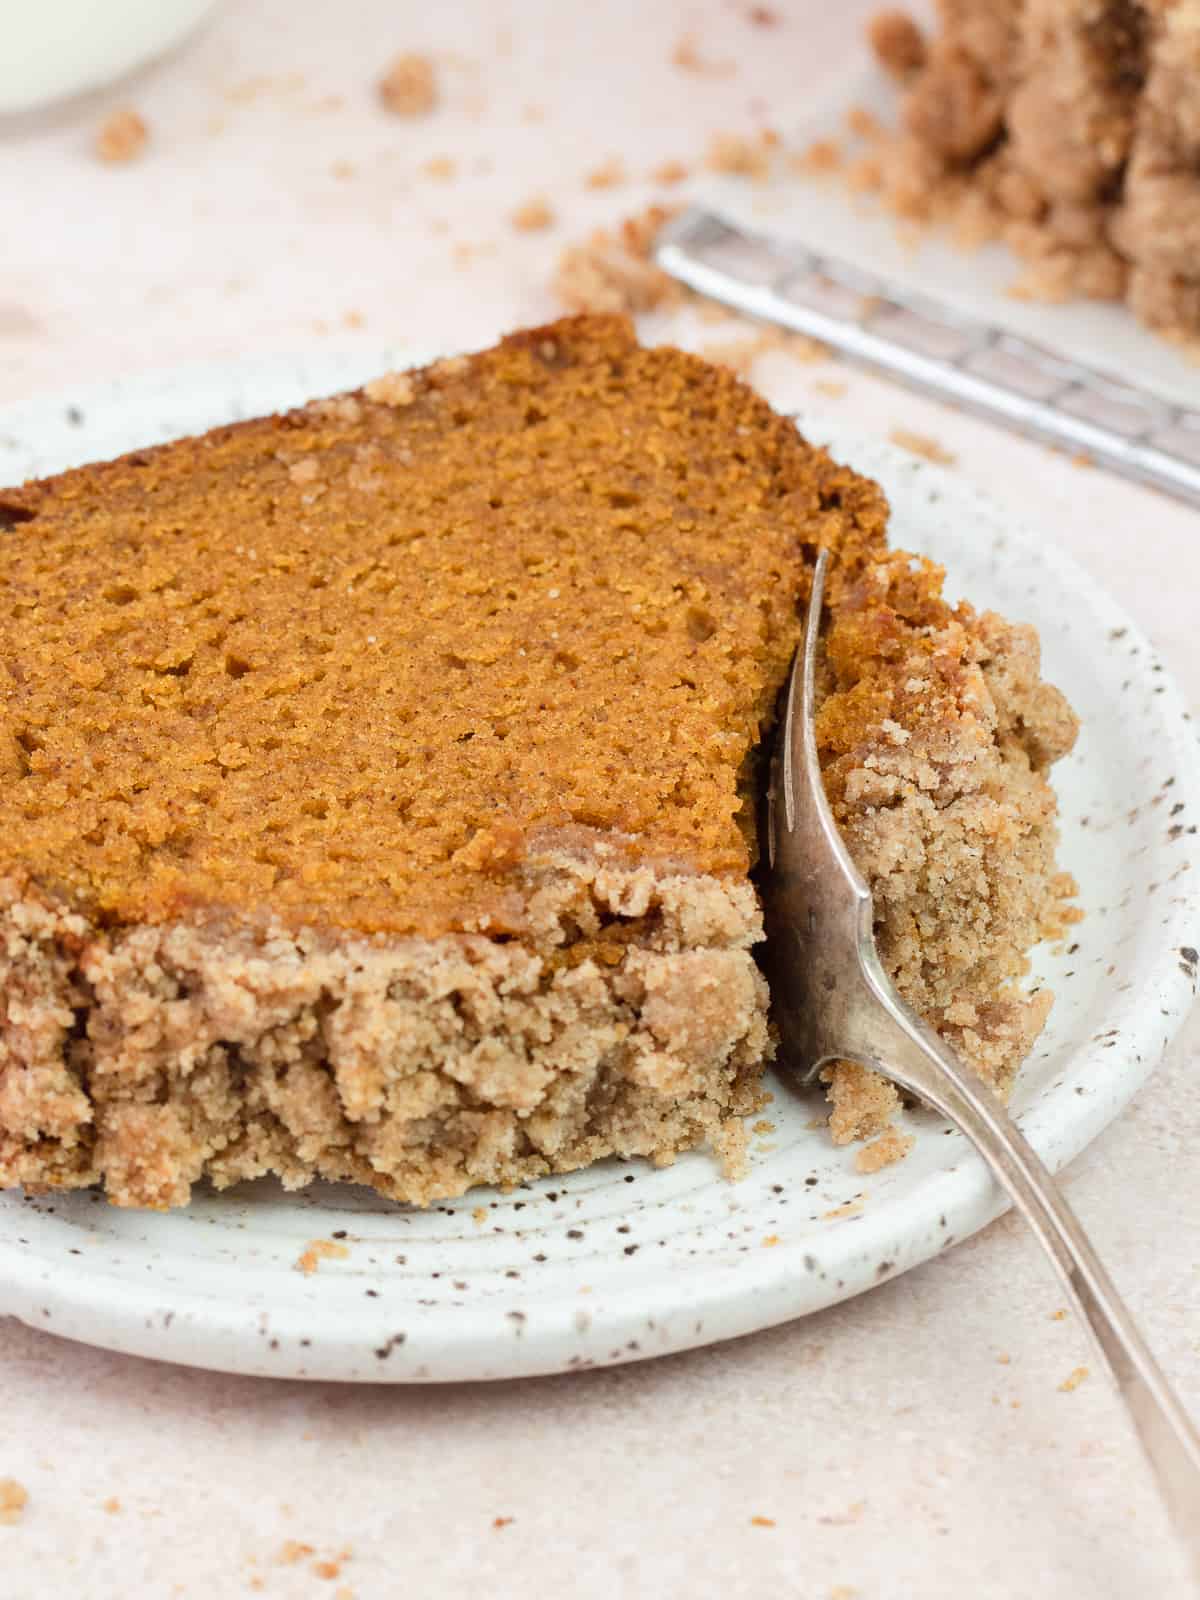 Slice of pumpkin bread on a plate with fork